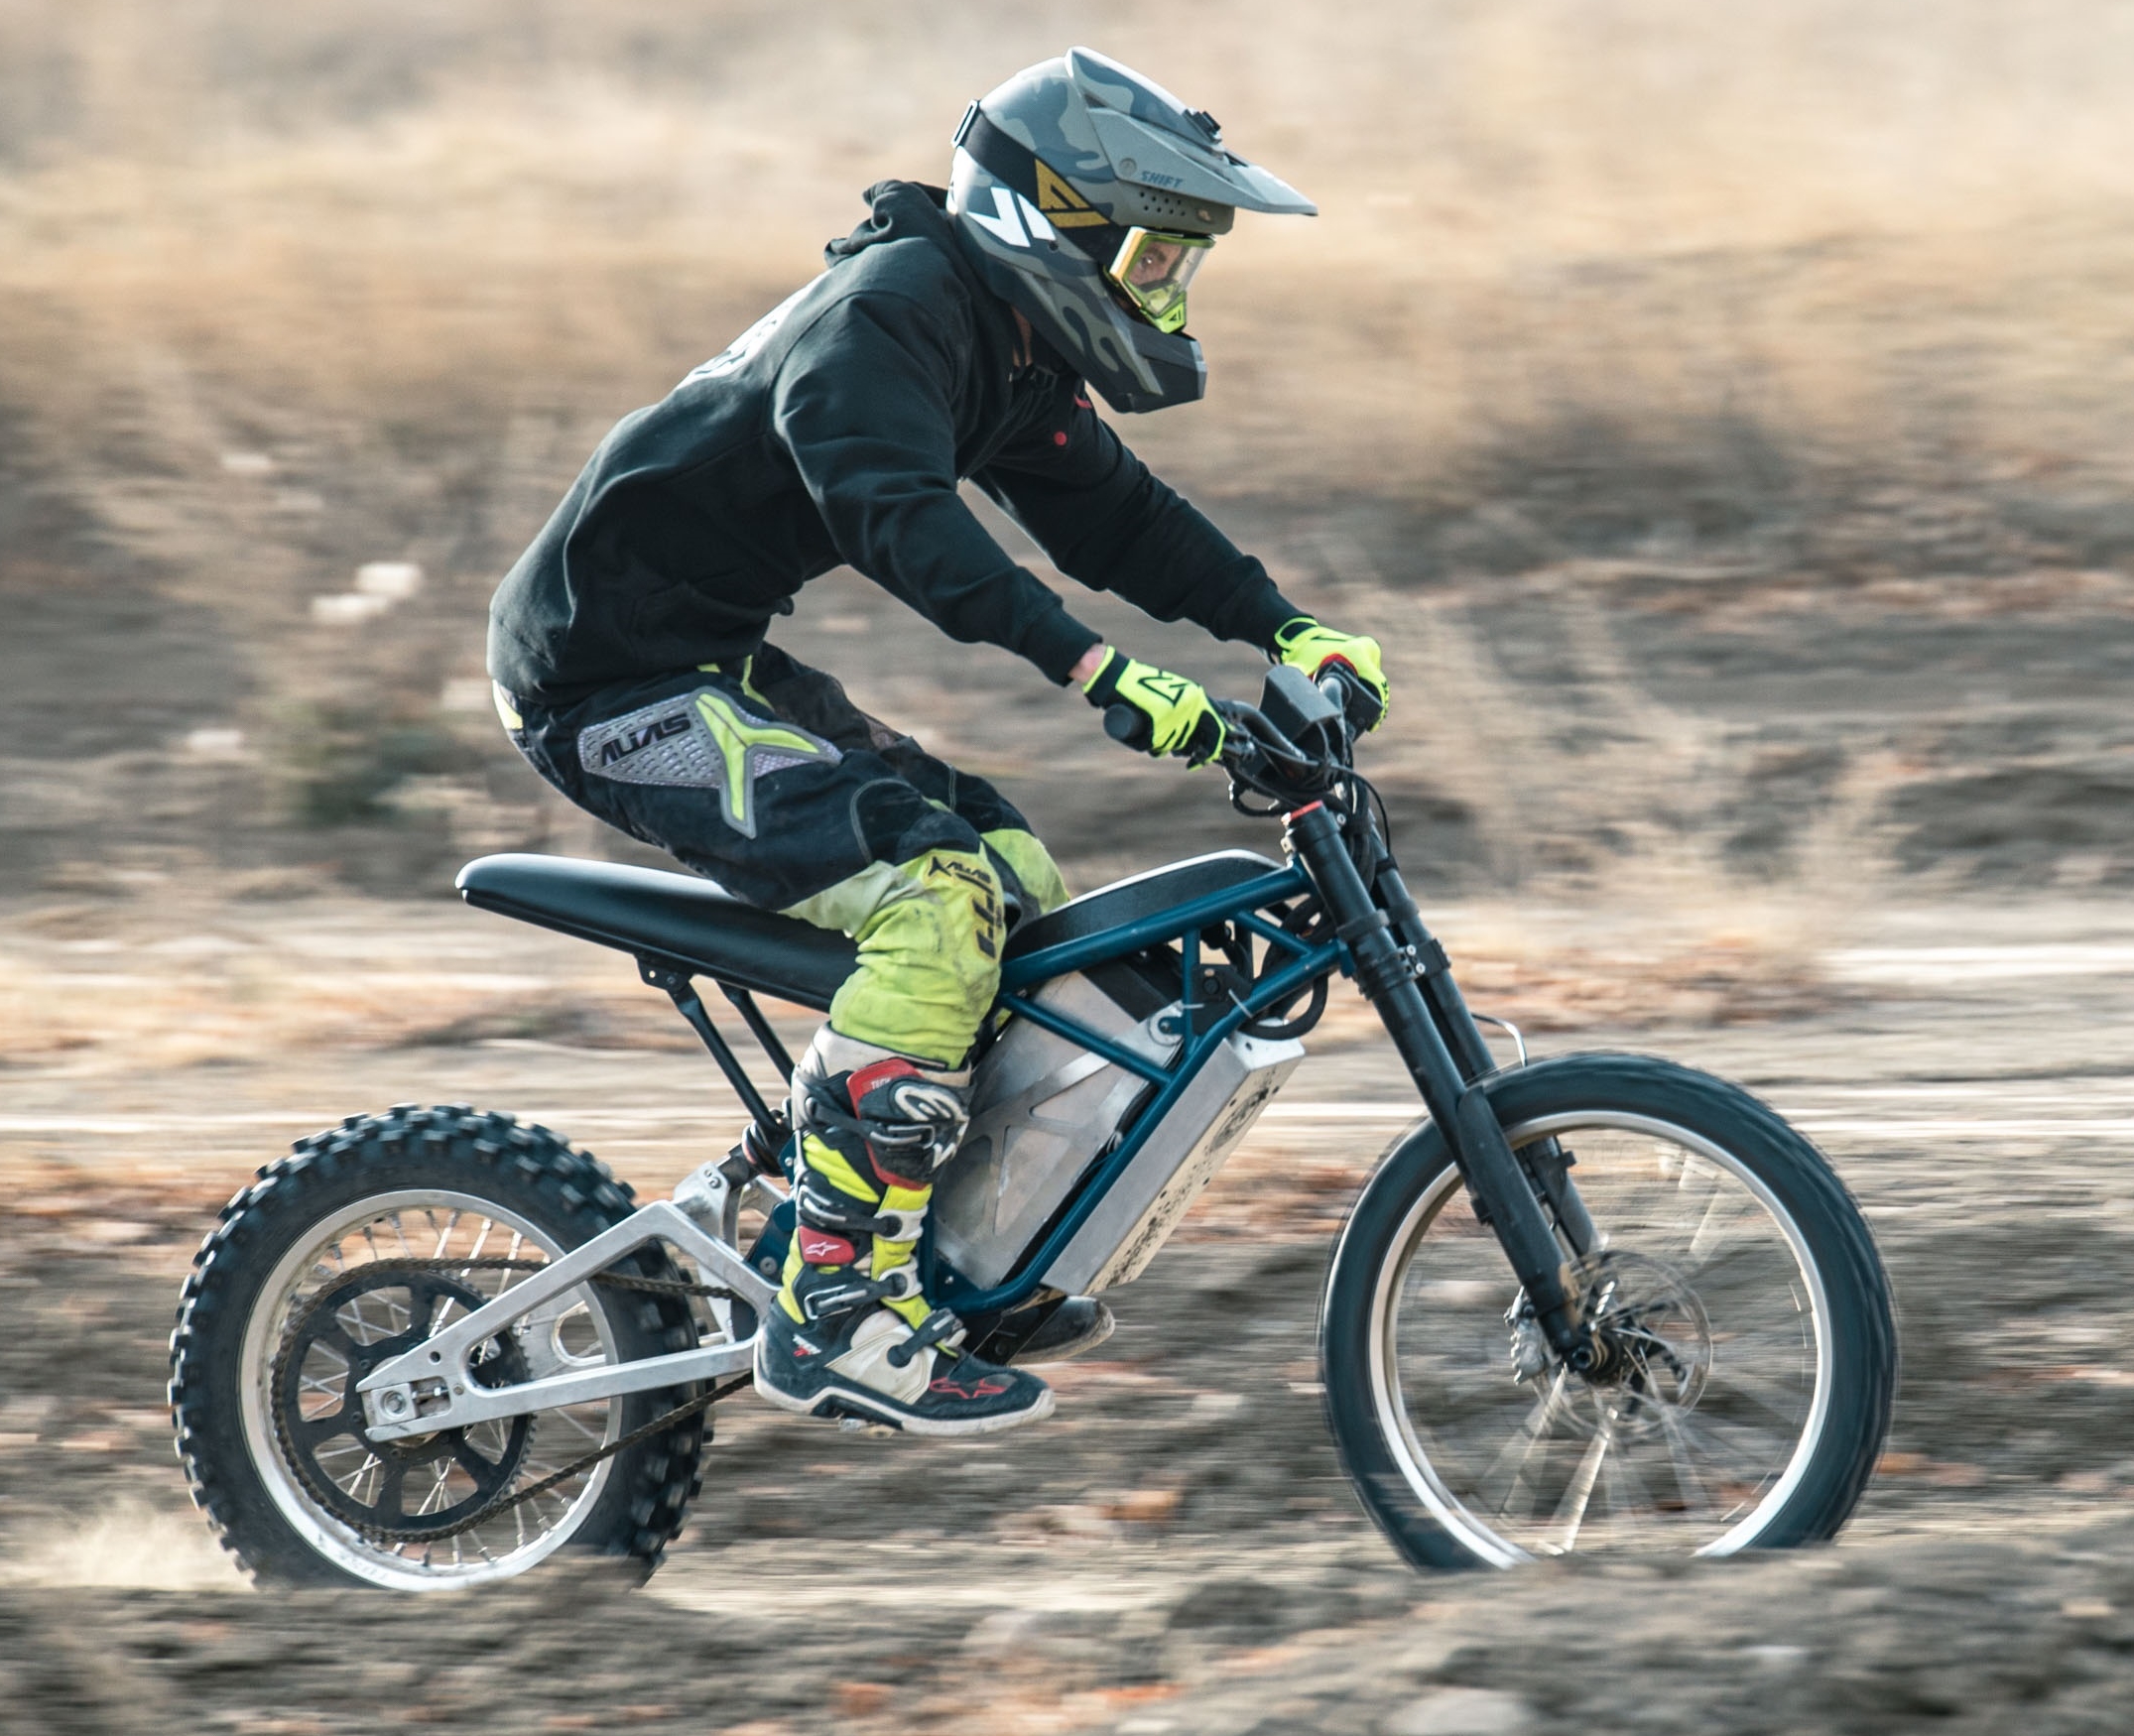 Accelerated Systems Inc. (ASI) And Armstrong Electric Vehicles (AEV) Collaborate To Develop The First Rear Brakeless eMotocross